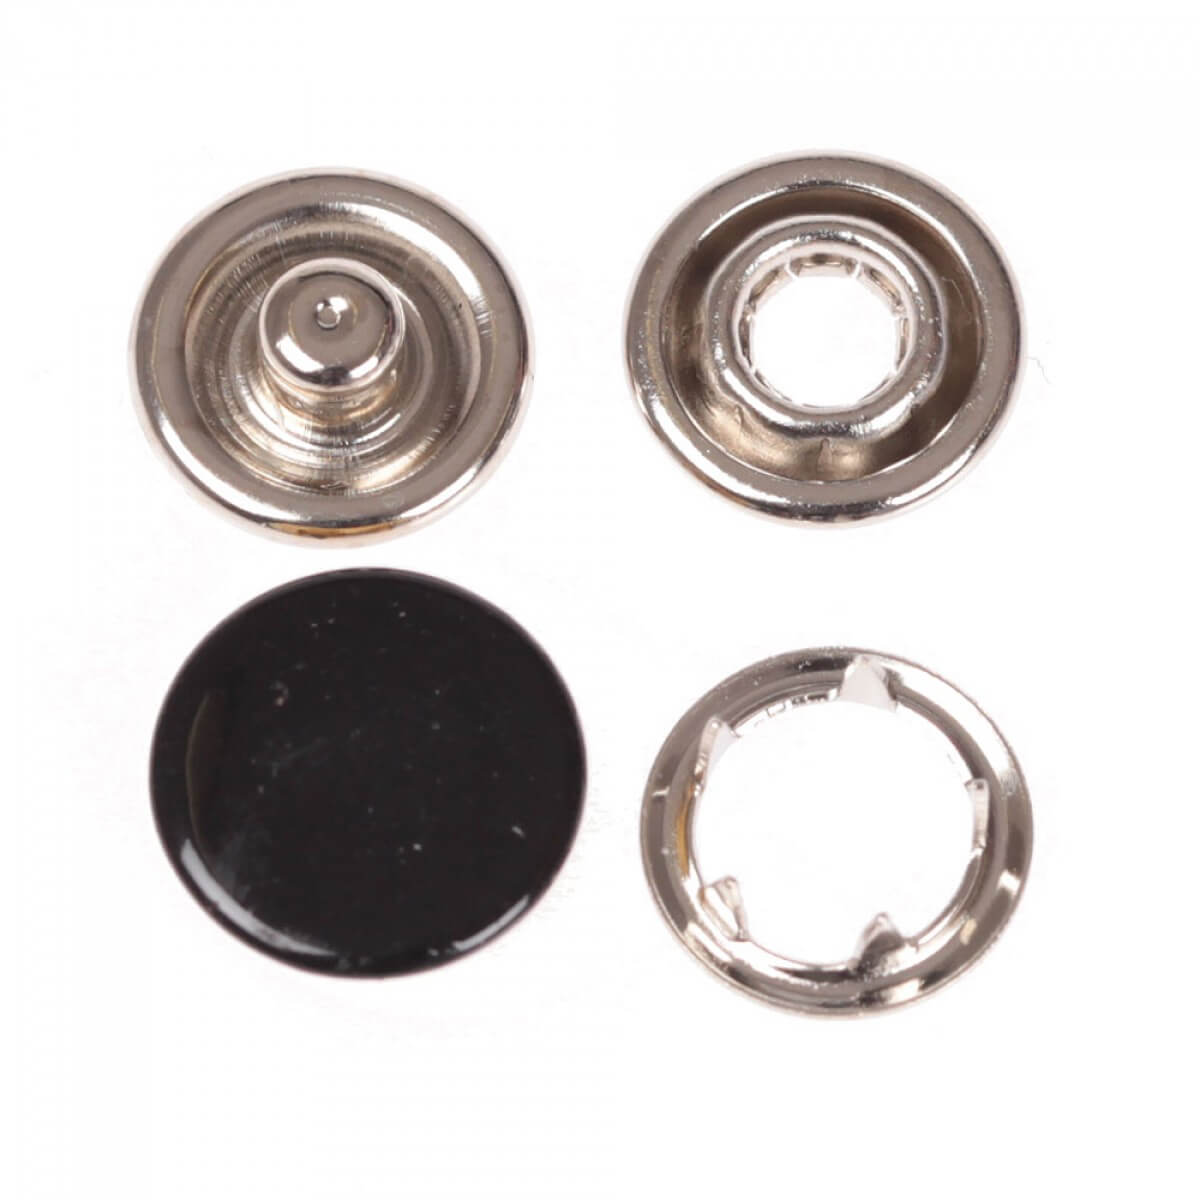 Boutons pressions métal rond - 11,5mm - Or - Accessoires Couture